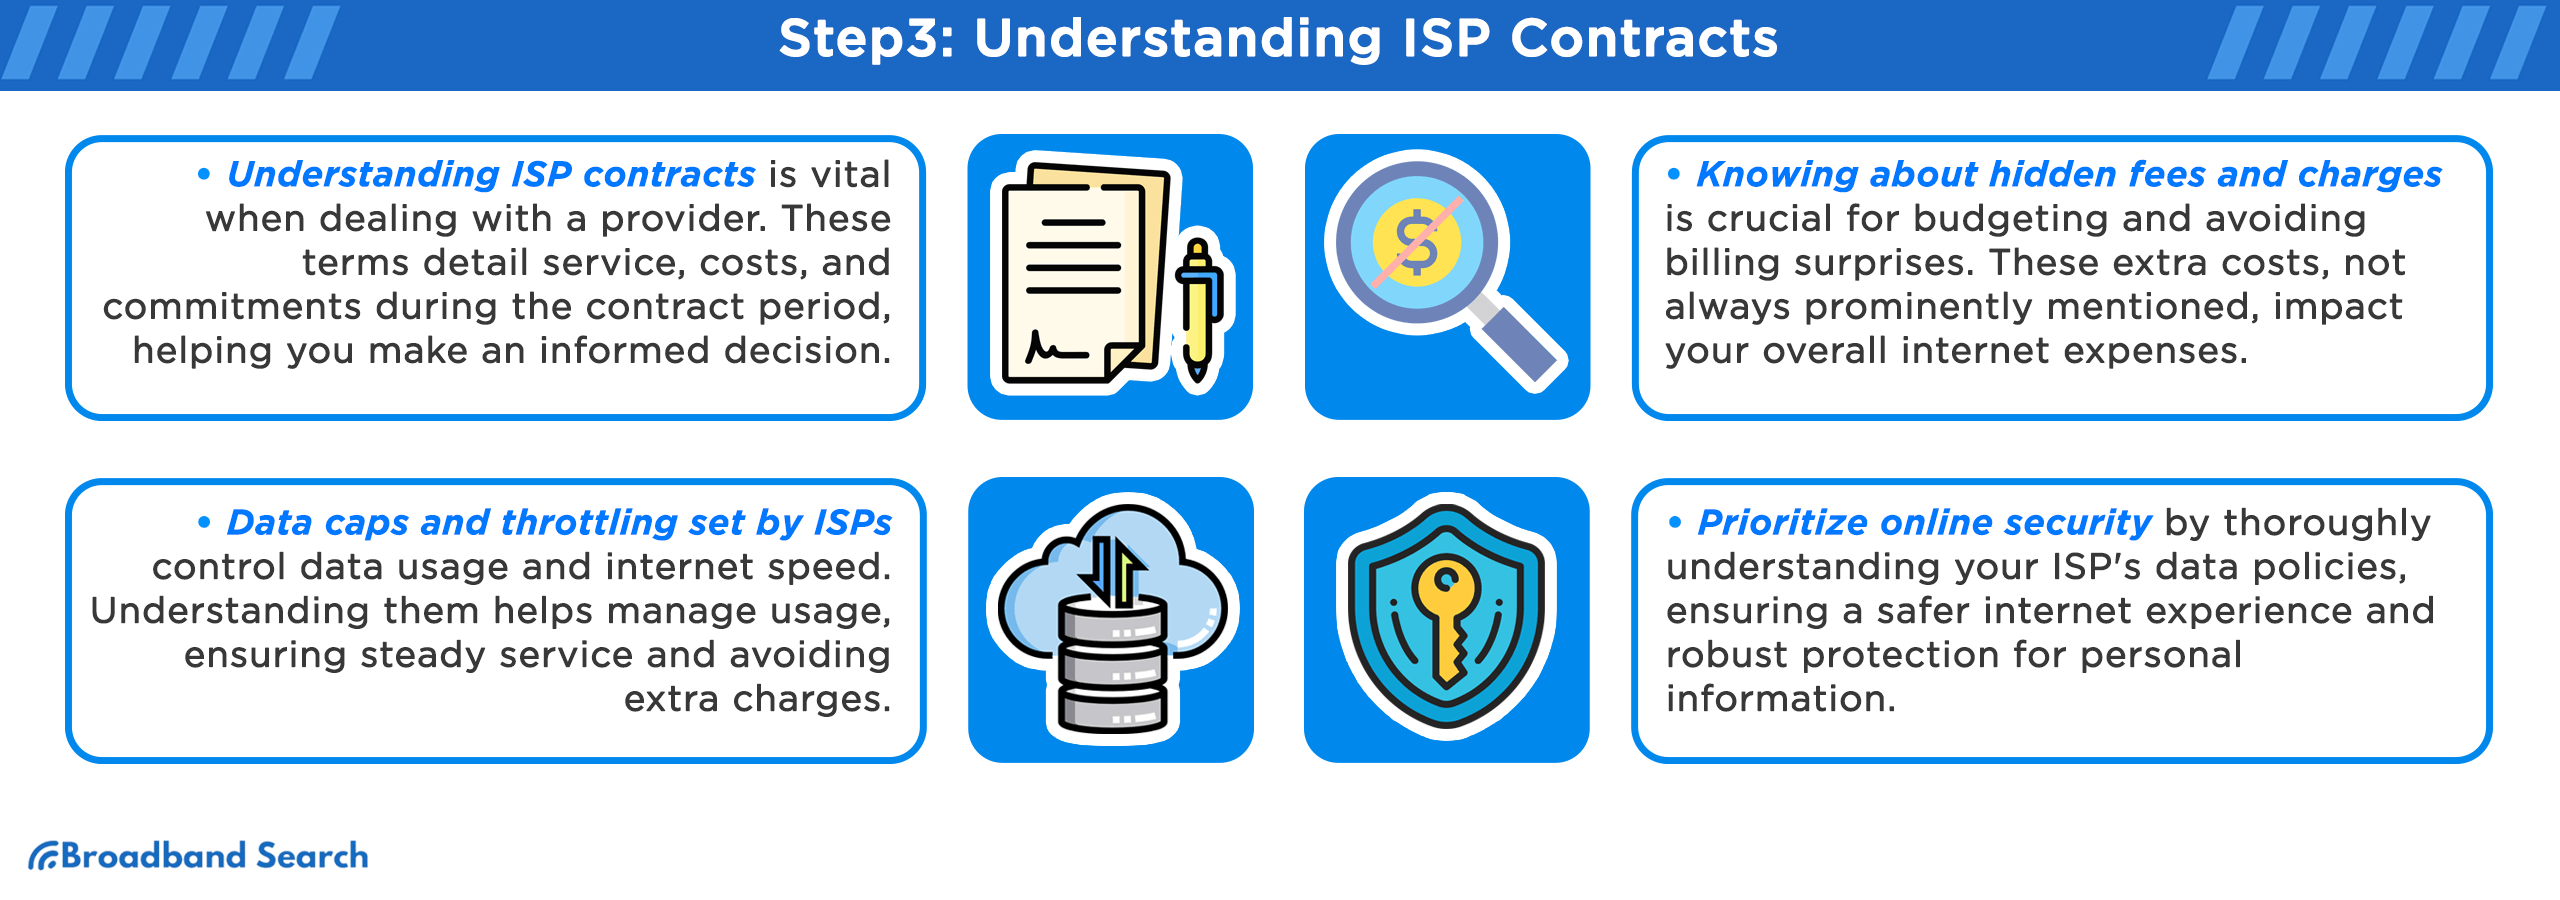 Four tips on how to understand ISP contracts